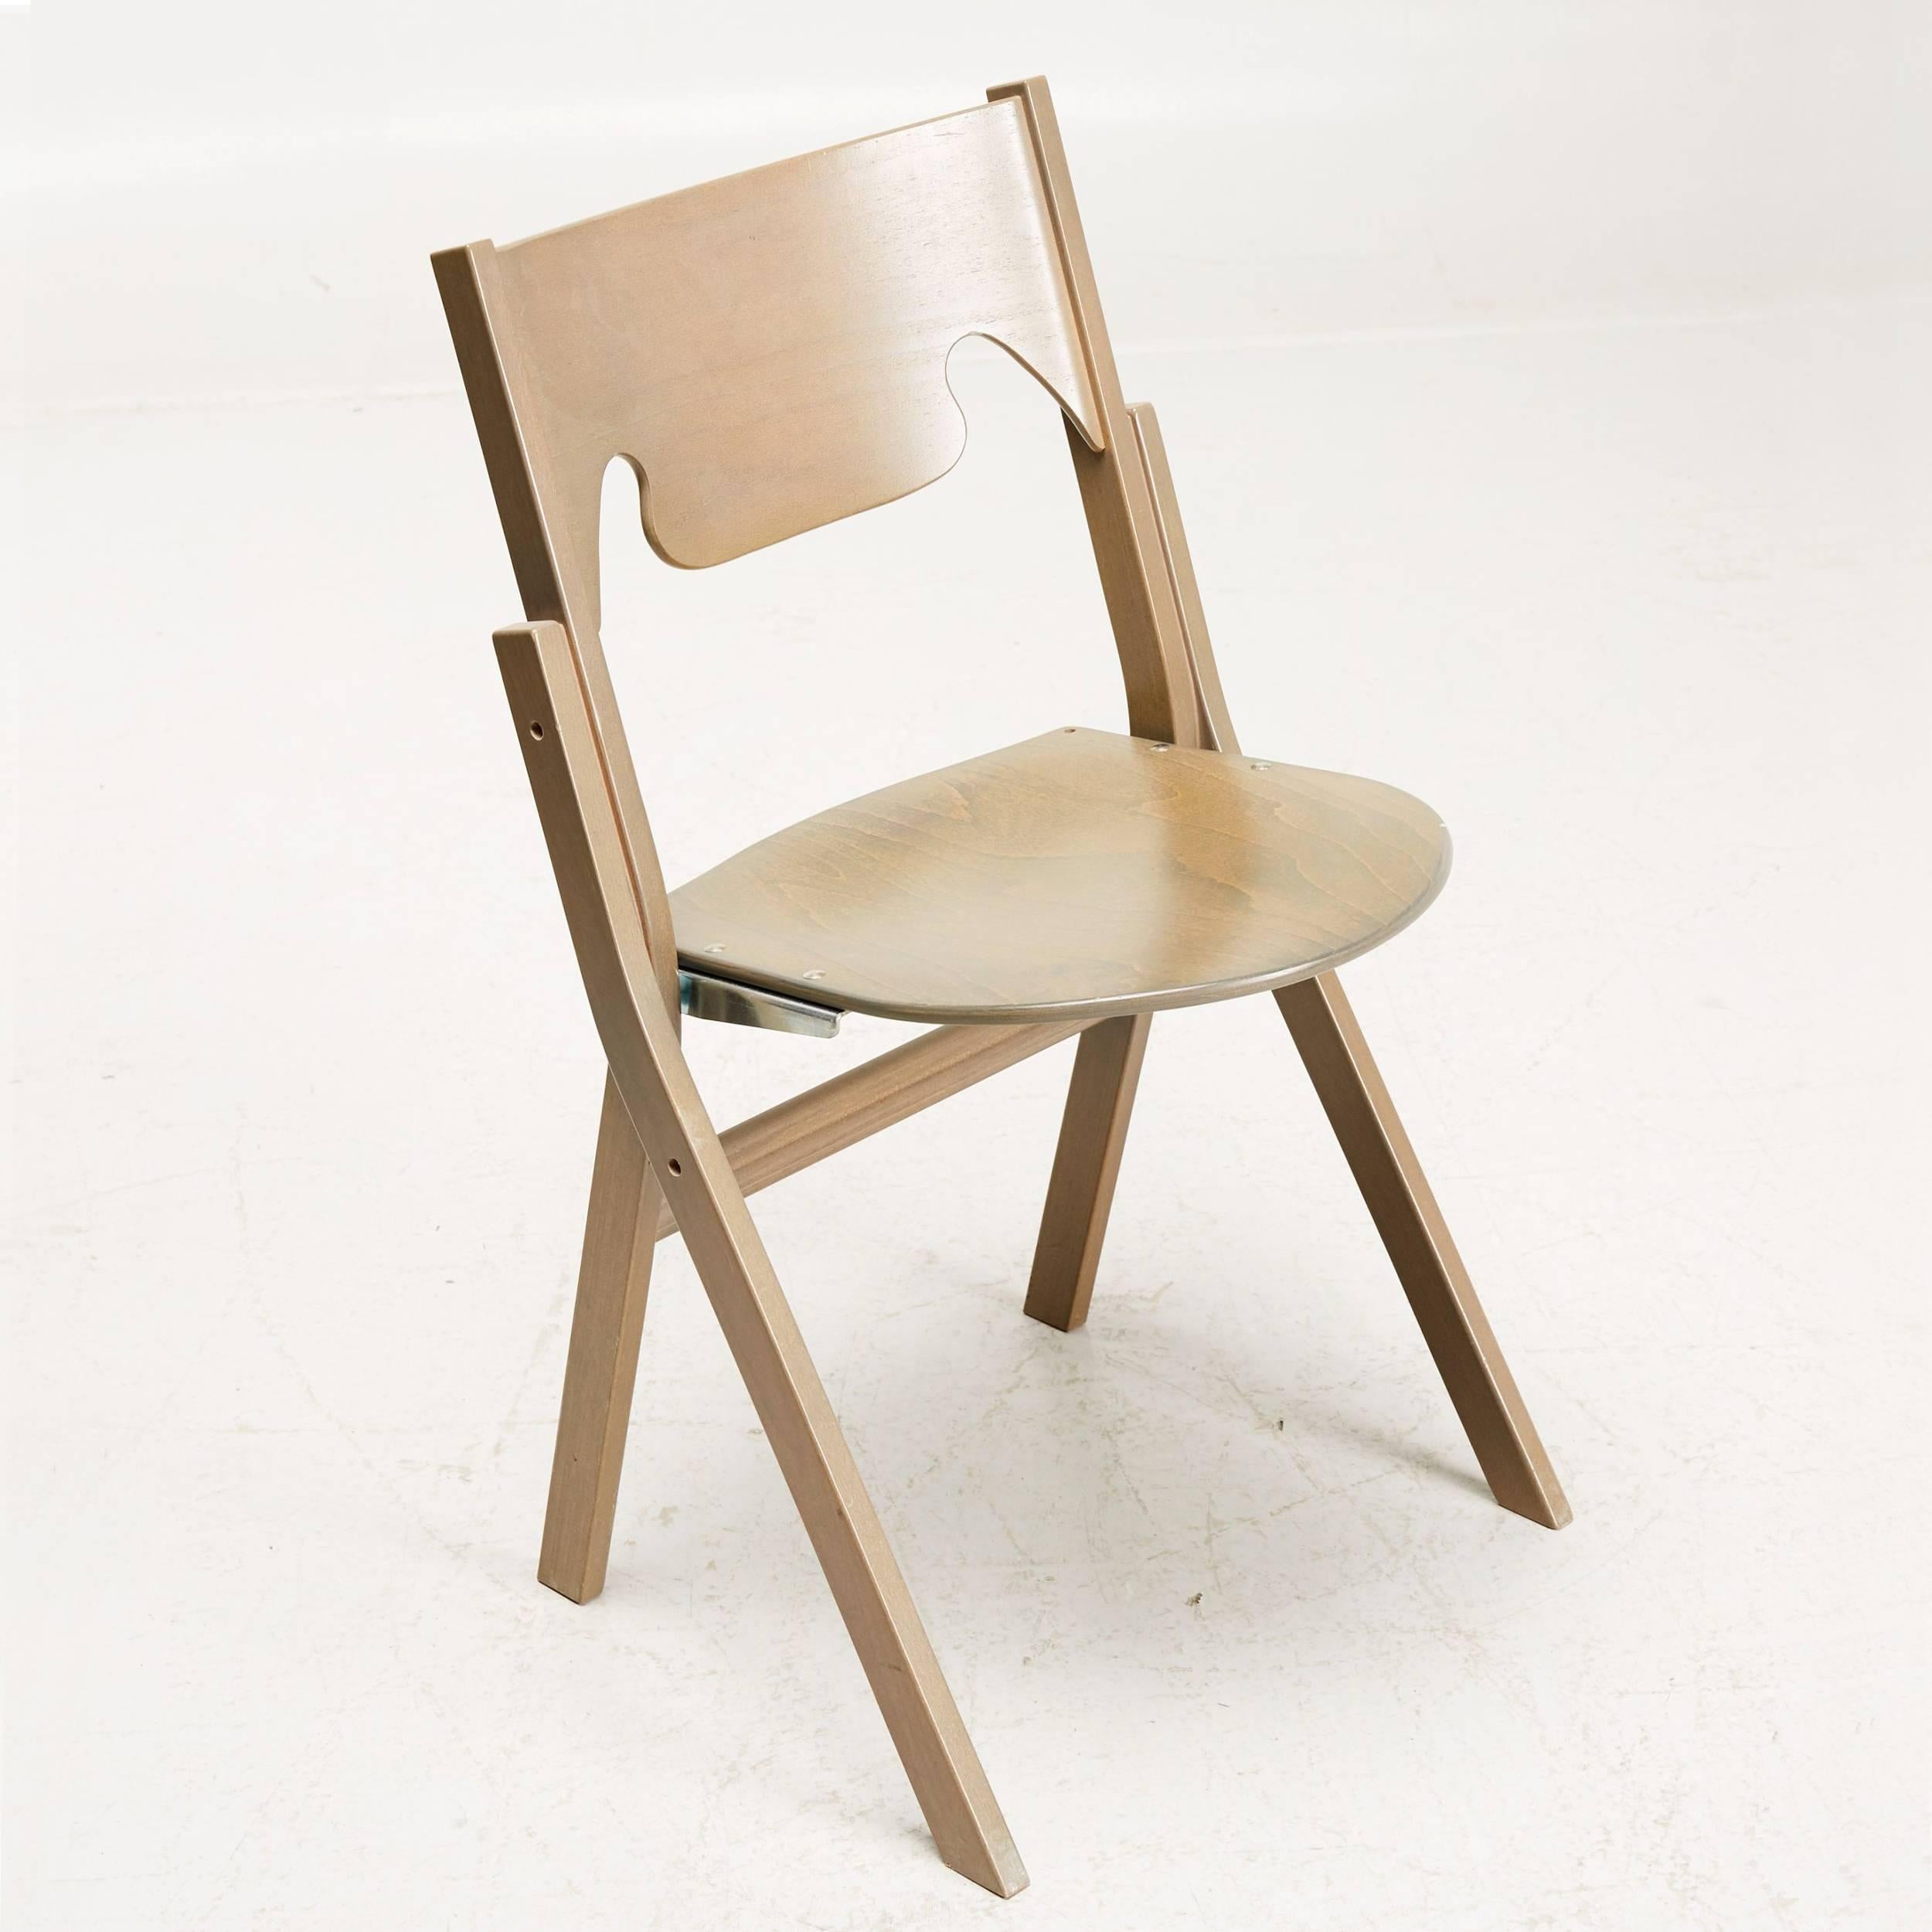 Set of 24 Scandinavian Postmodern folding chairs designed and produced by Swedish architect Ake Axelsson, made in solid birchwood.
Transport trolley included.
 